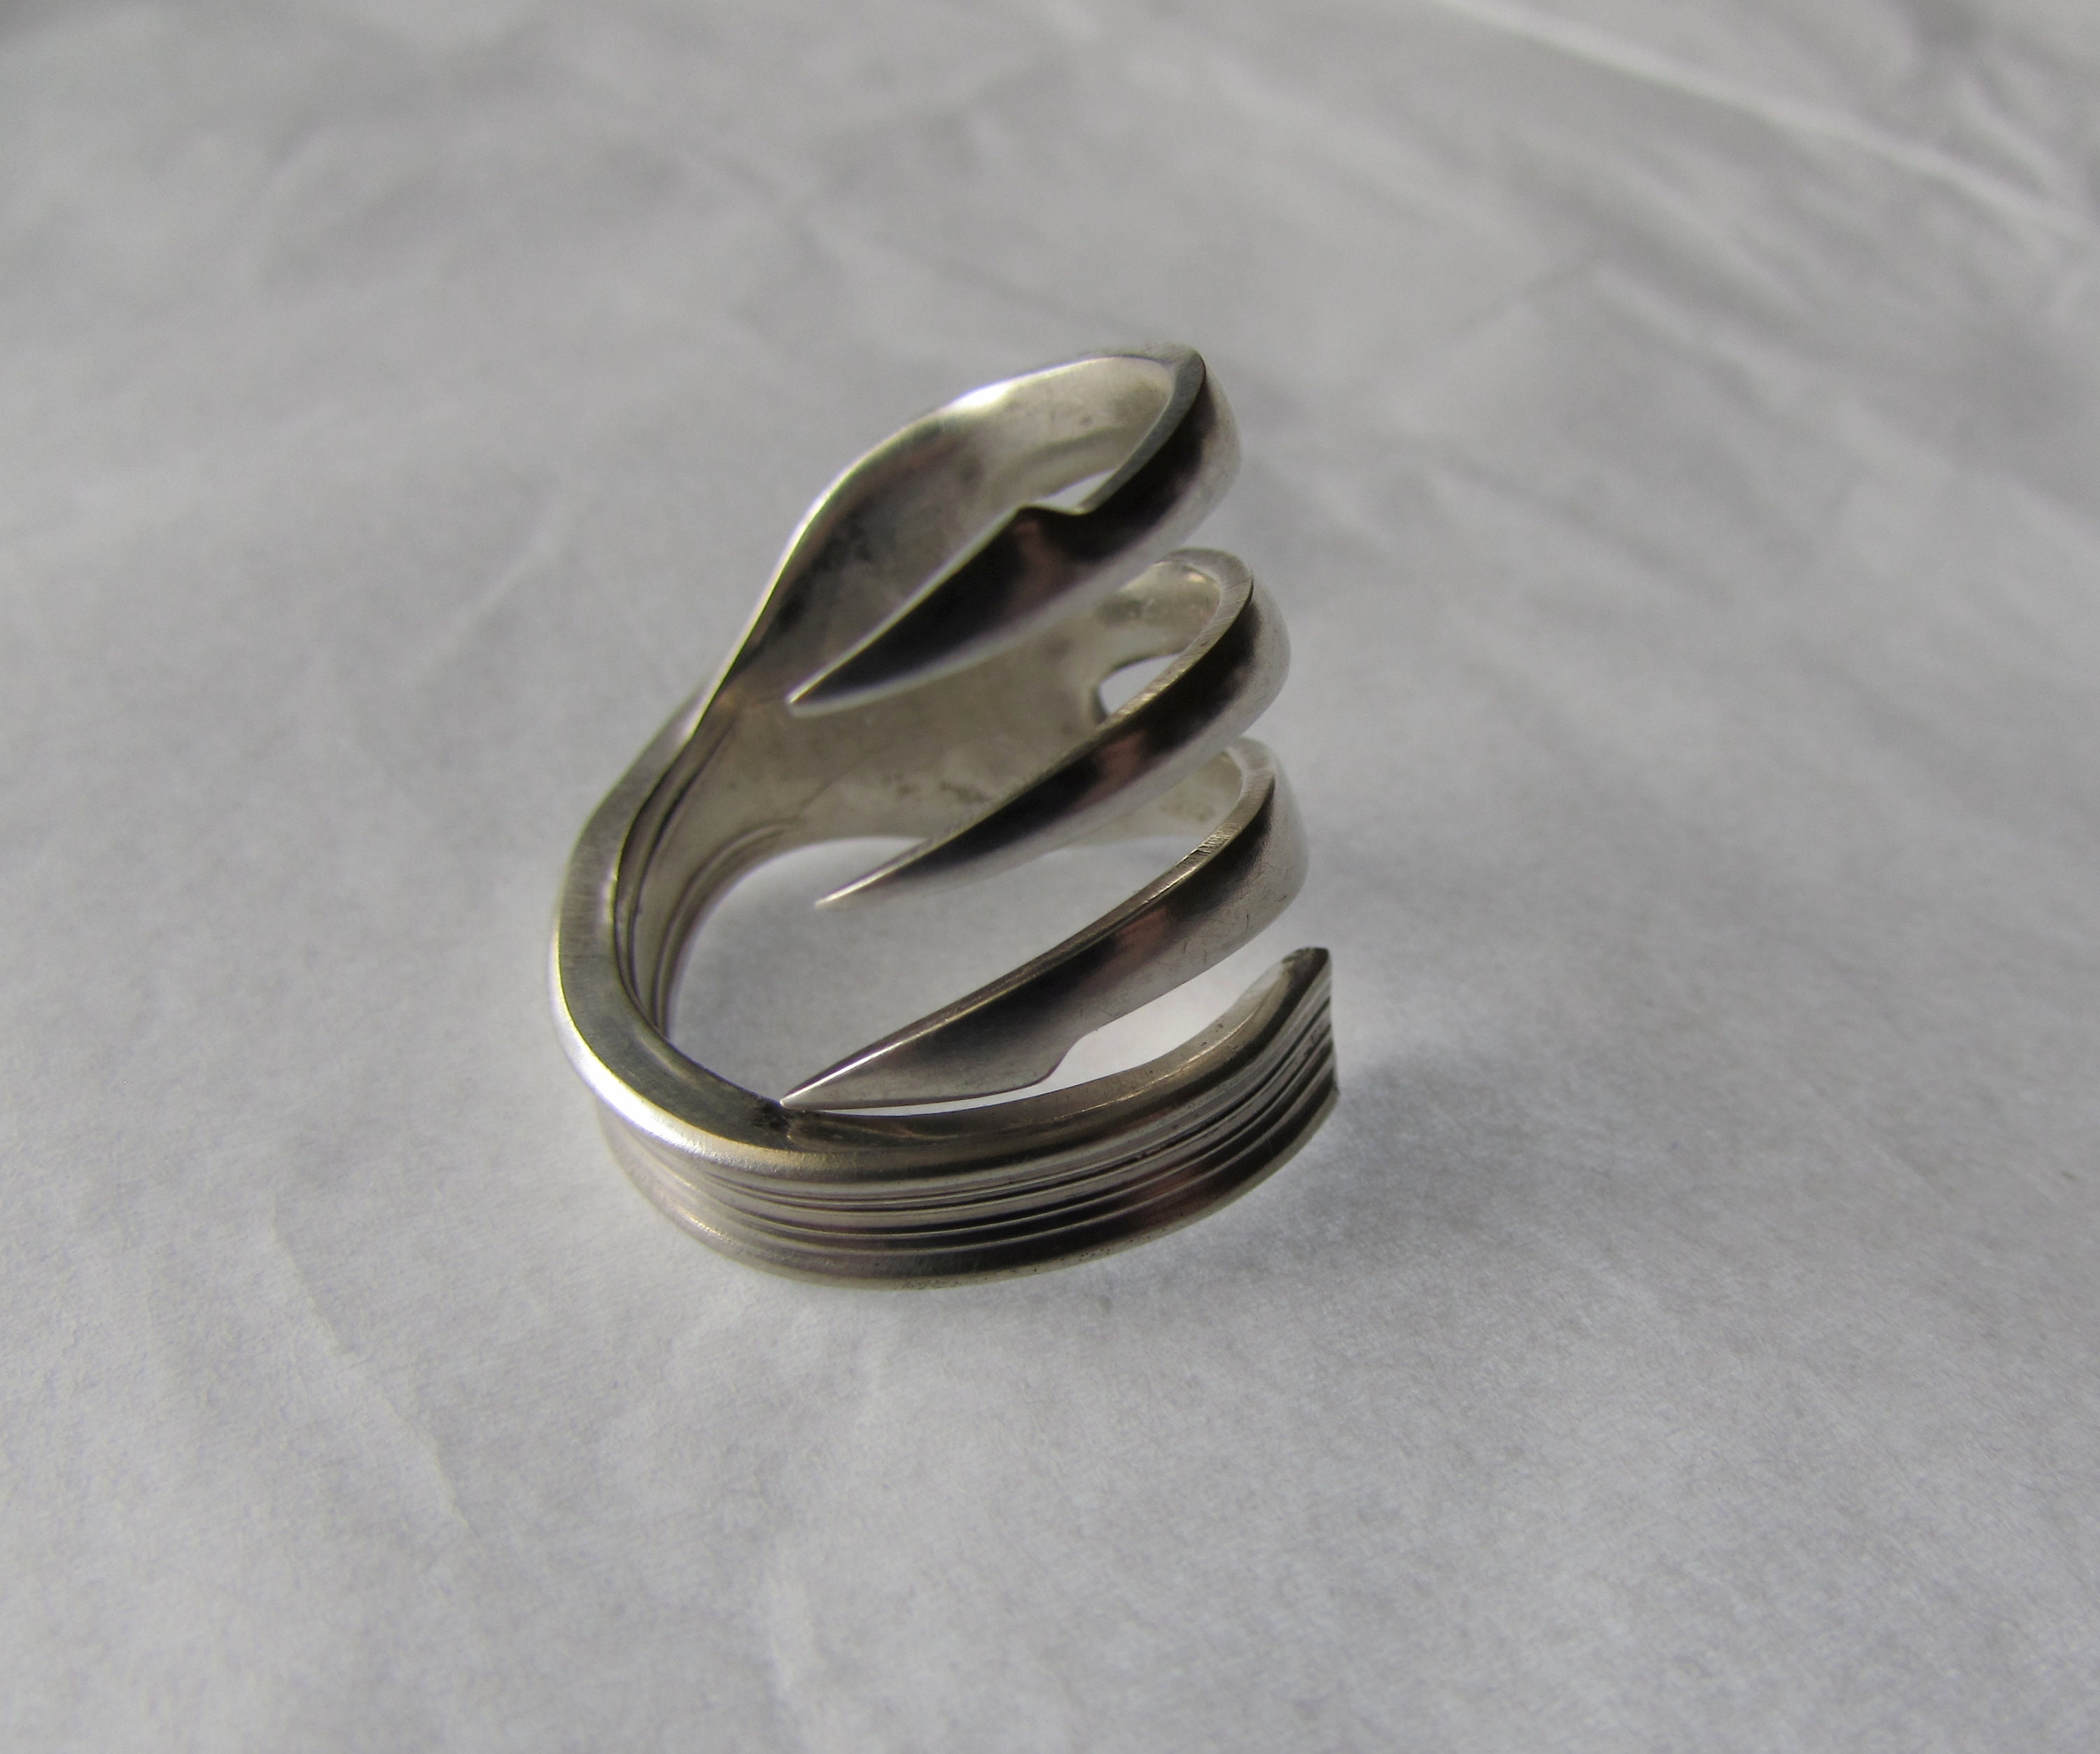 Fork Ring. Three Tine Speared Trident Times. Sizes 6-12